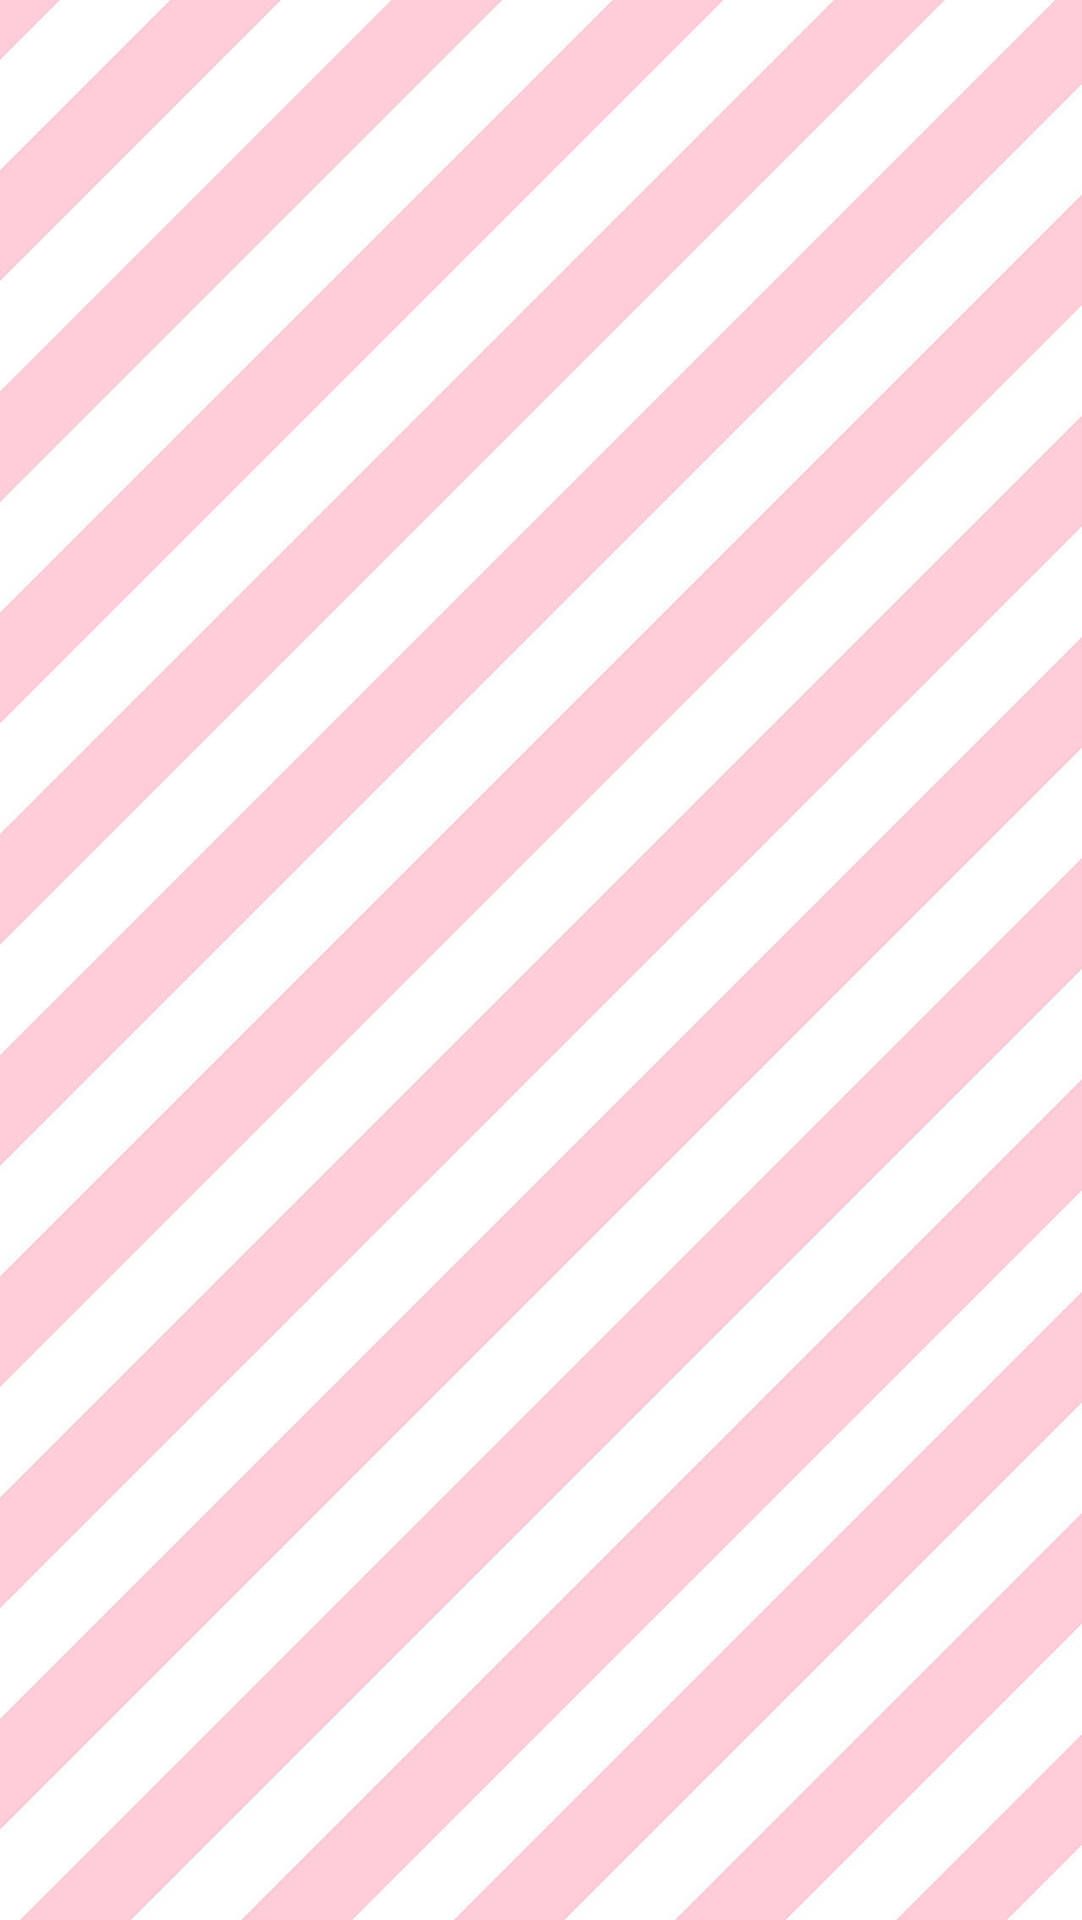 Diagonal Stripes Pattern iPhone 8 wallpaper, background, lock screen, home screen, pretty, girly, aesthetic, cute, modern, simple, abstract, artistic, creative, for girls, for women, for teens, for kids, for any device - Preppy